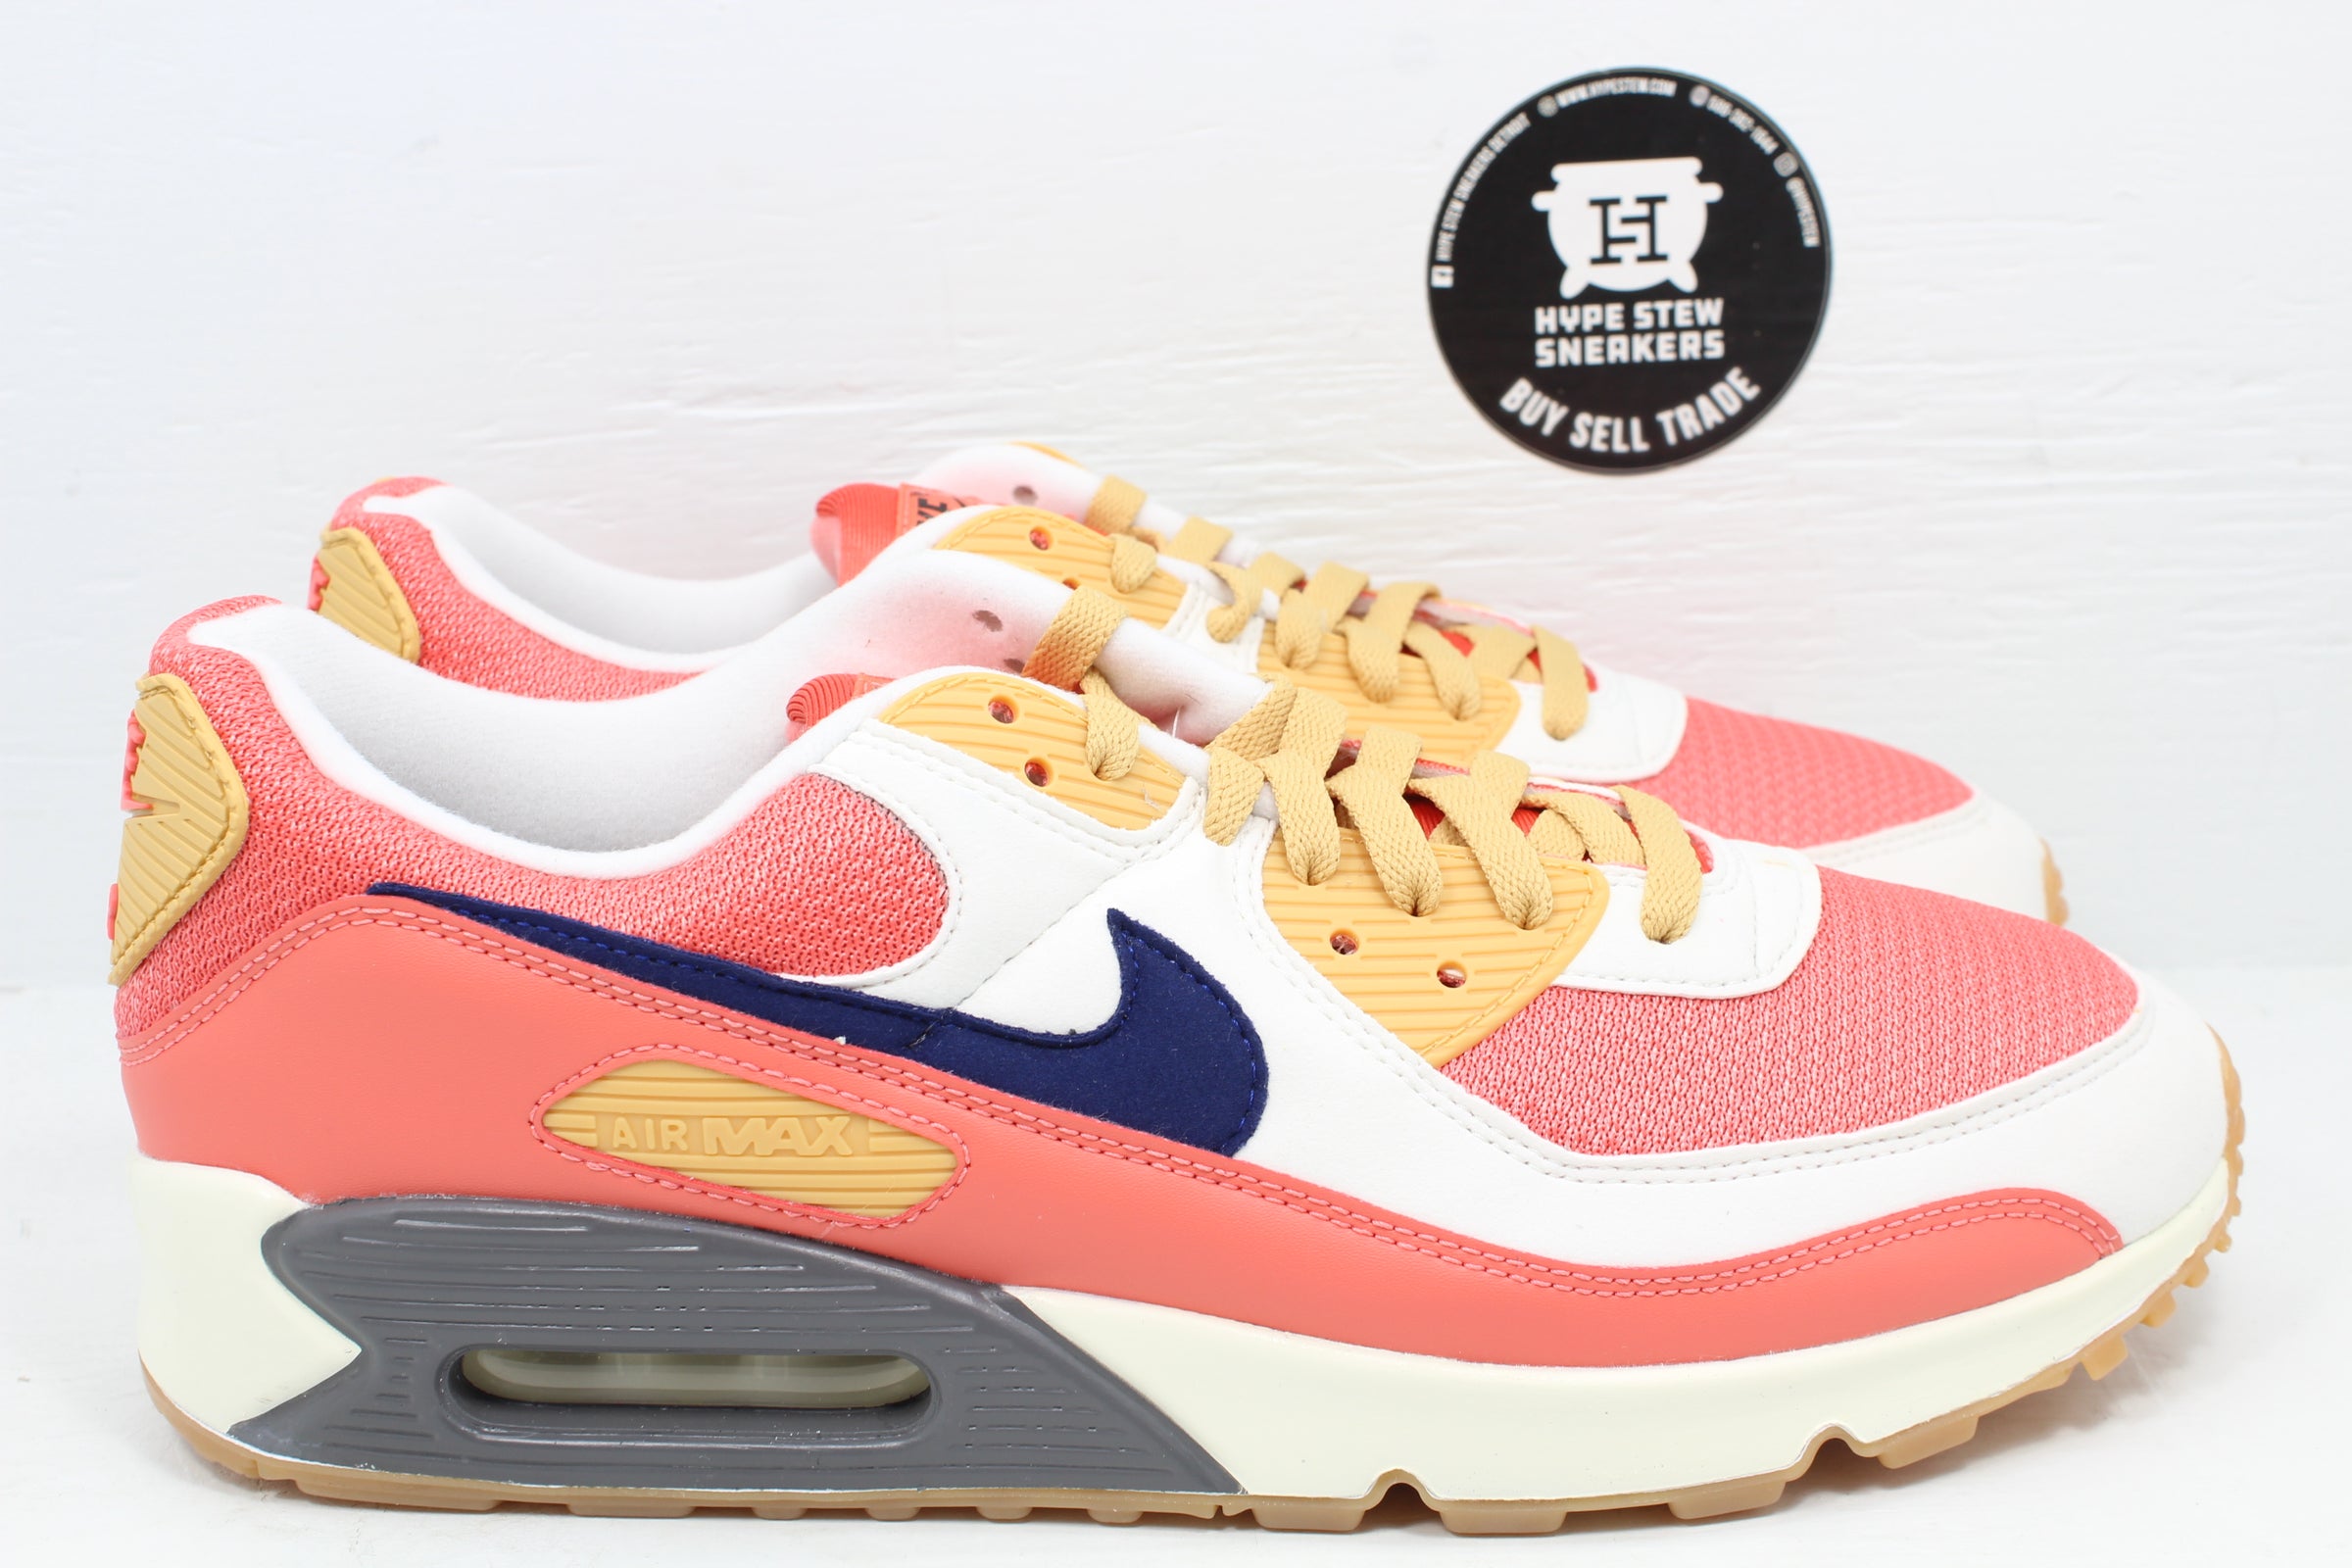 How Good Are These Customs??? Nike By You - Air Max 90 (Sail